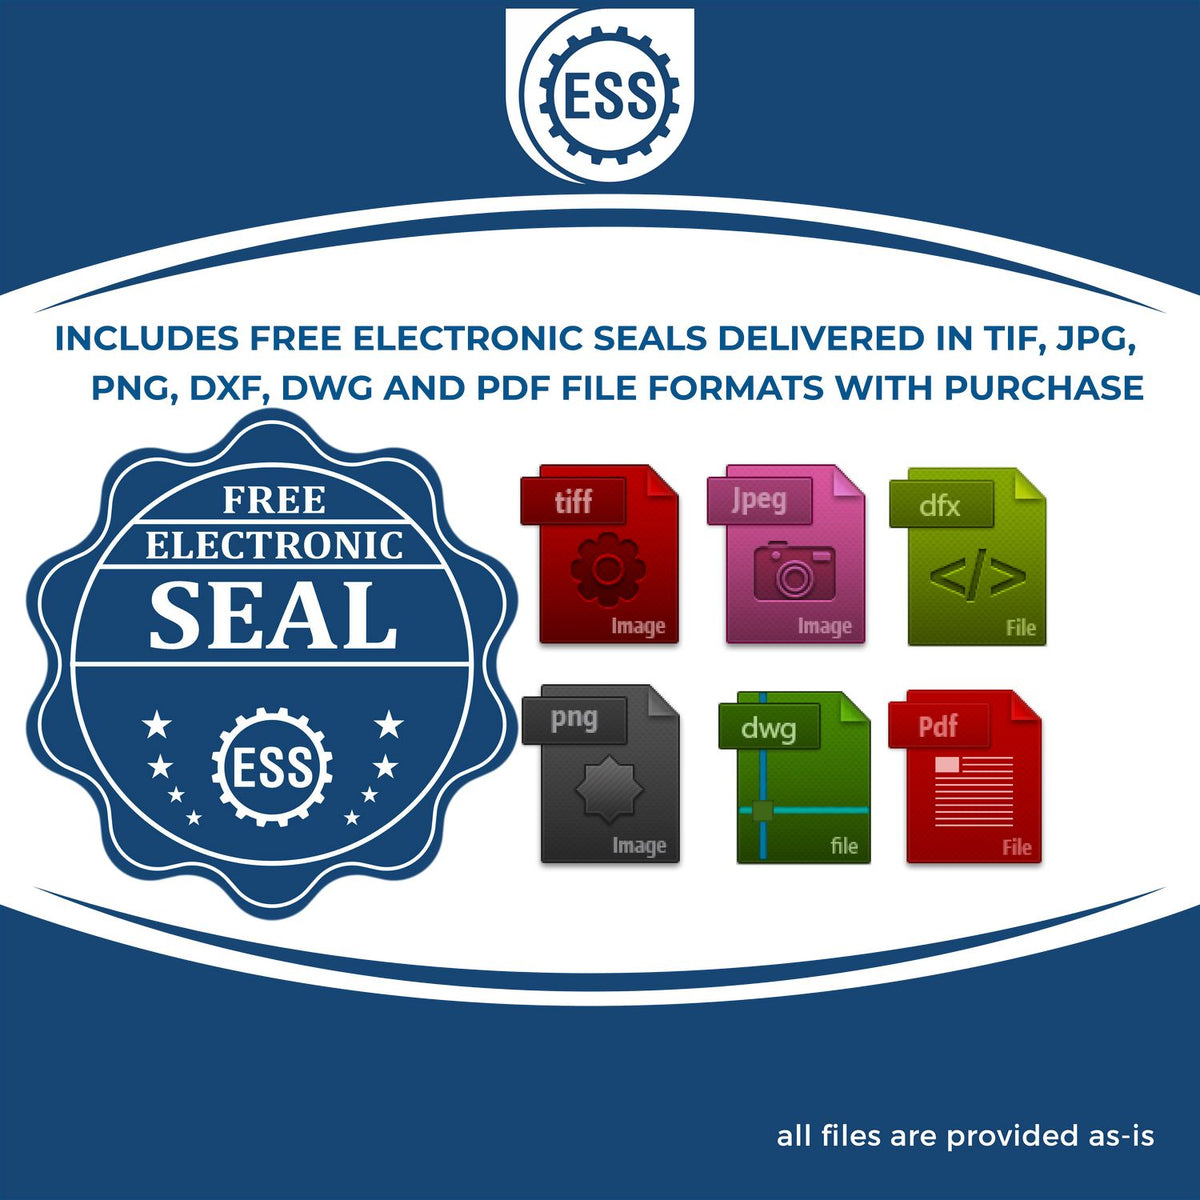 An infographic for the free electronic seal for the Gift Massachusetts Engineer Seal illustrating the different file type icons such as DXF, DWG, TIF, JPG and PNG.